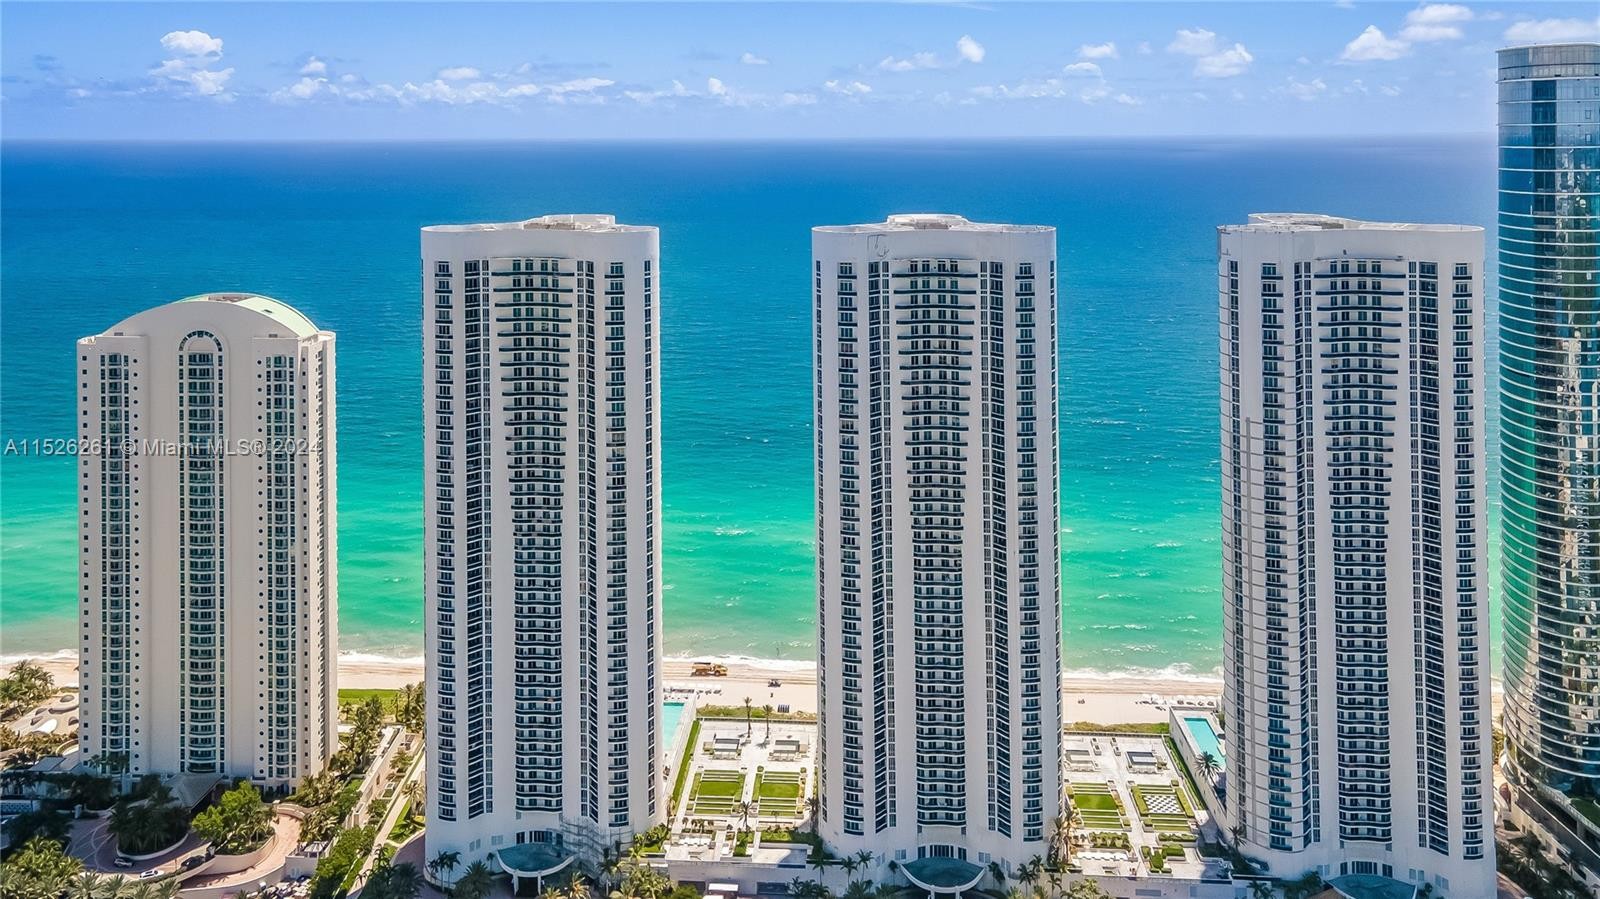 24. 15901 Collins Ave (Avail 6/1-11/30)